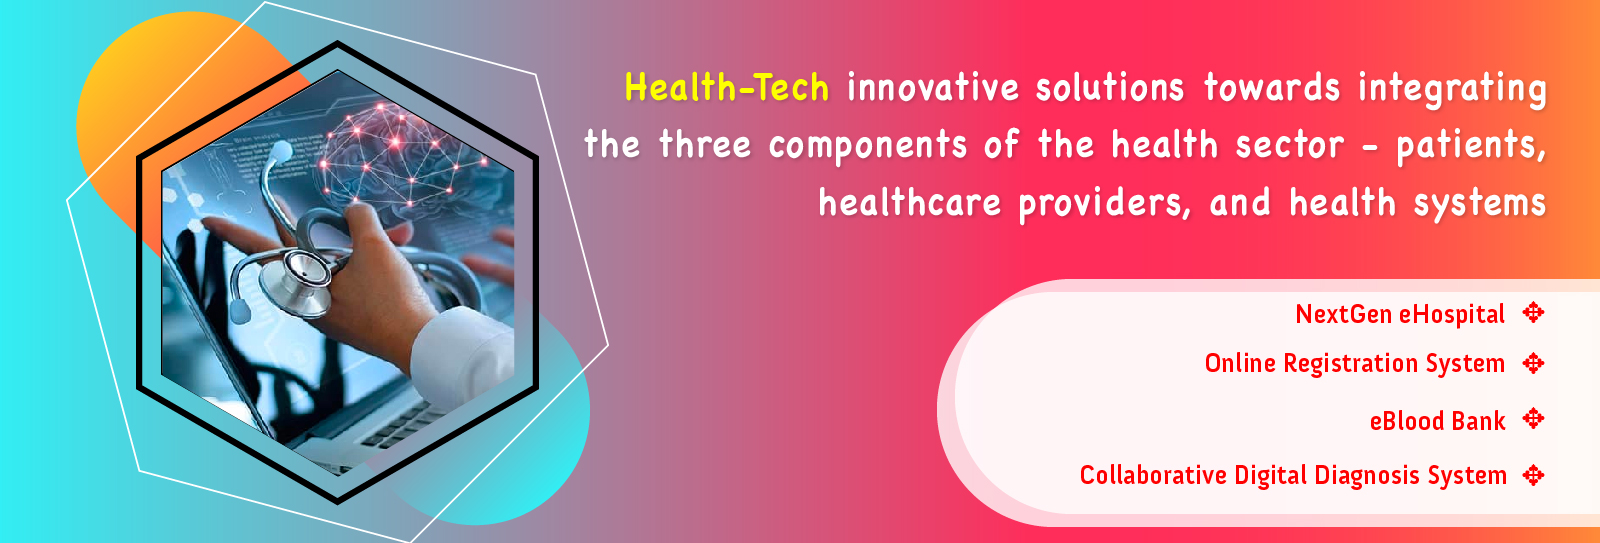 Image of Health-Tech Innovative Solutions